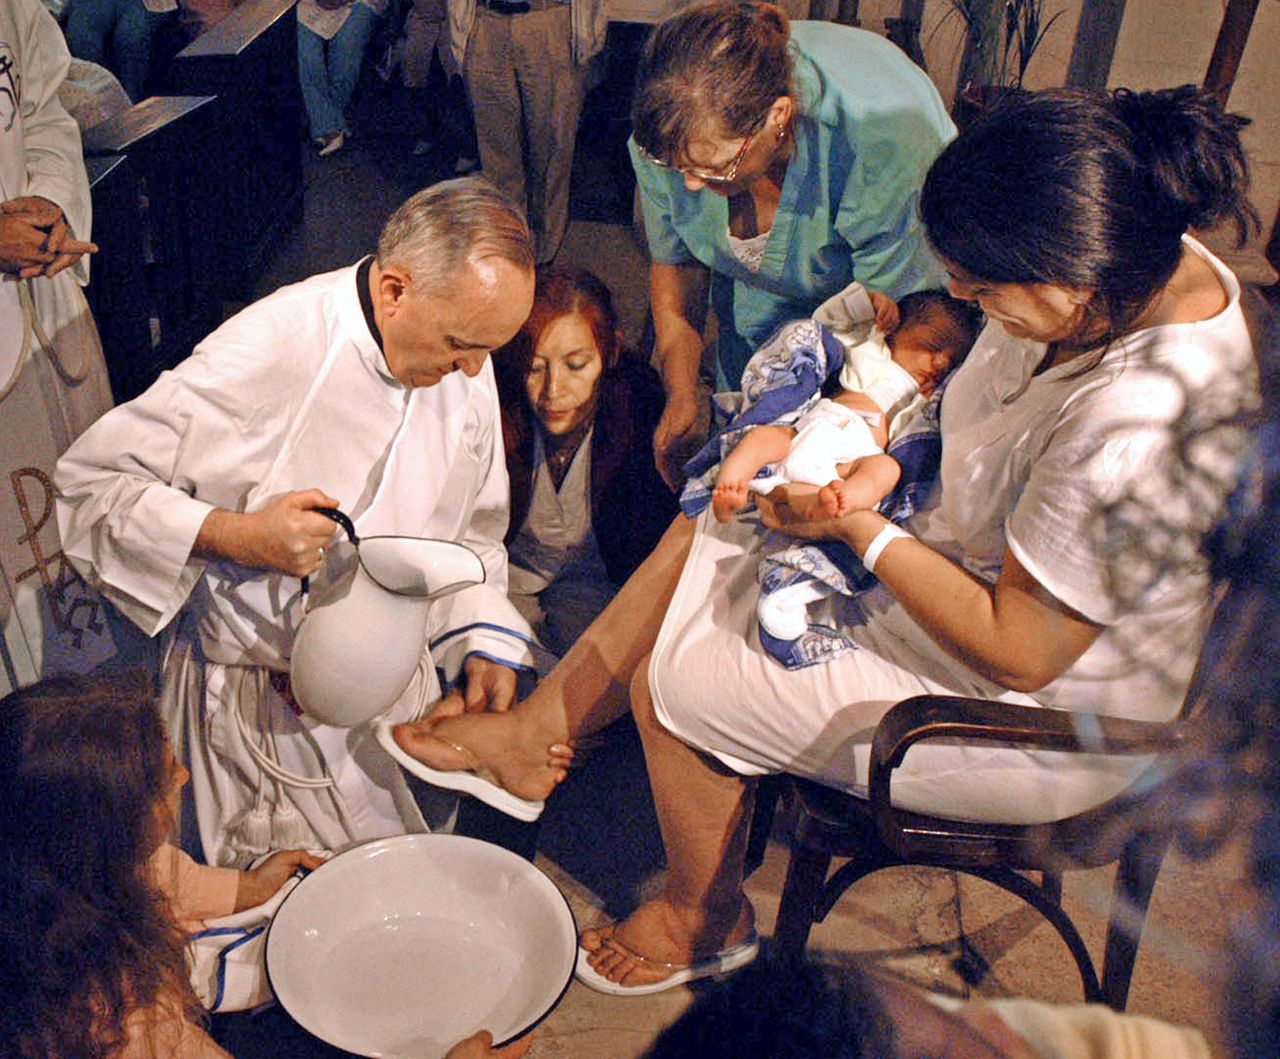 The future pope washes a woman's feet at a maternity hospital in Buenos Aires in 2005.